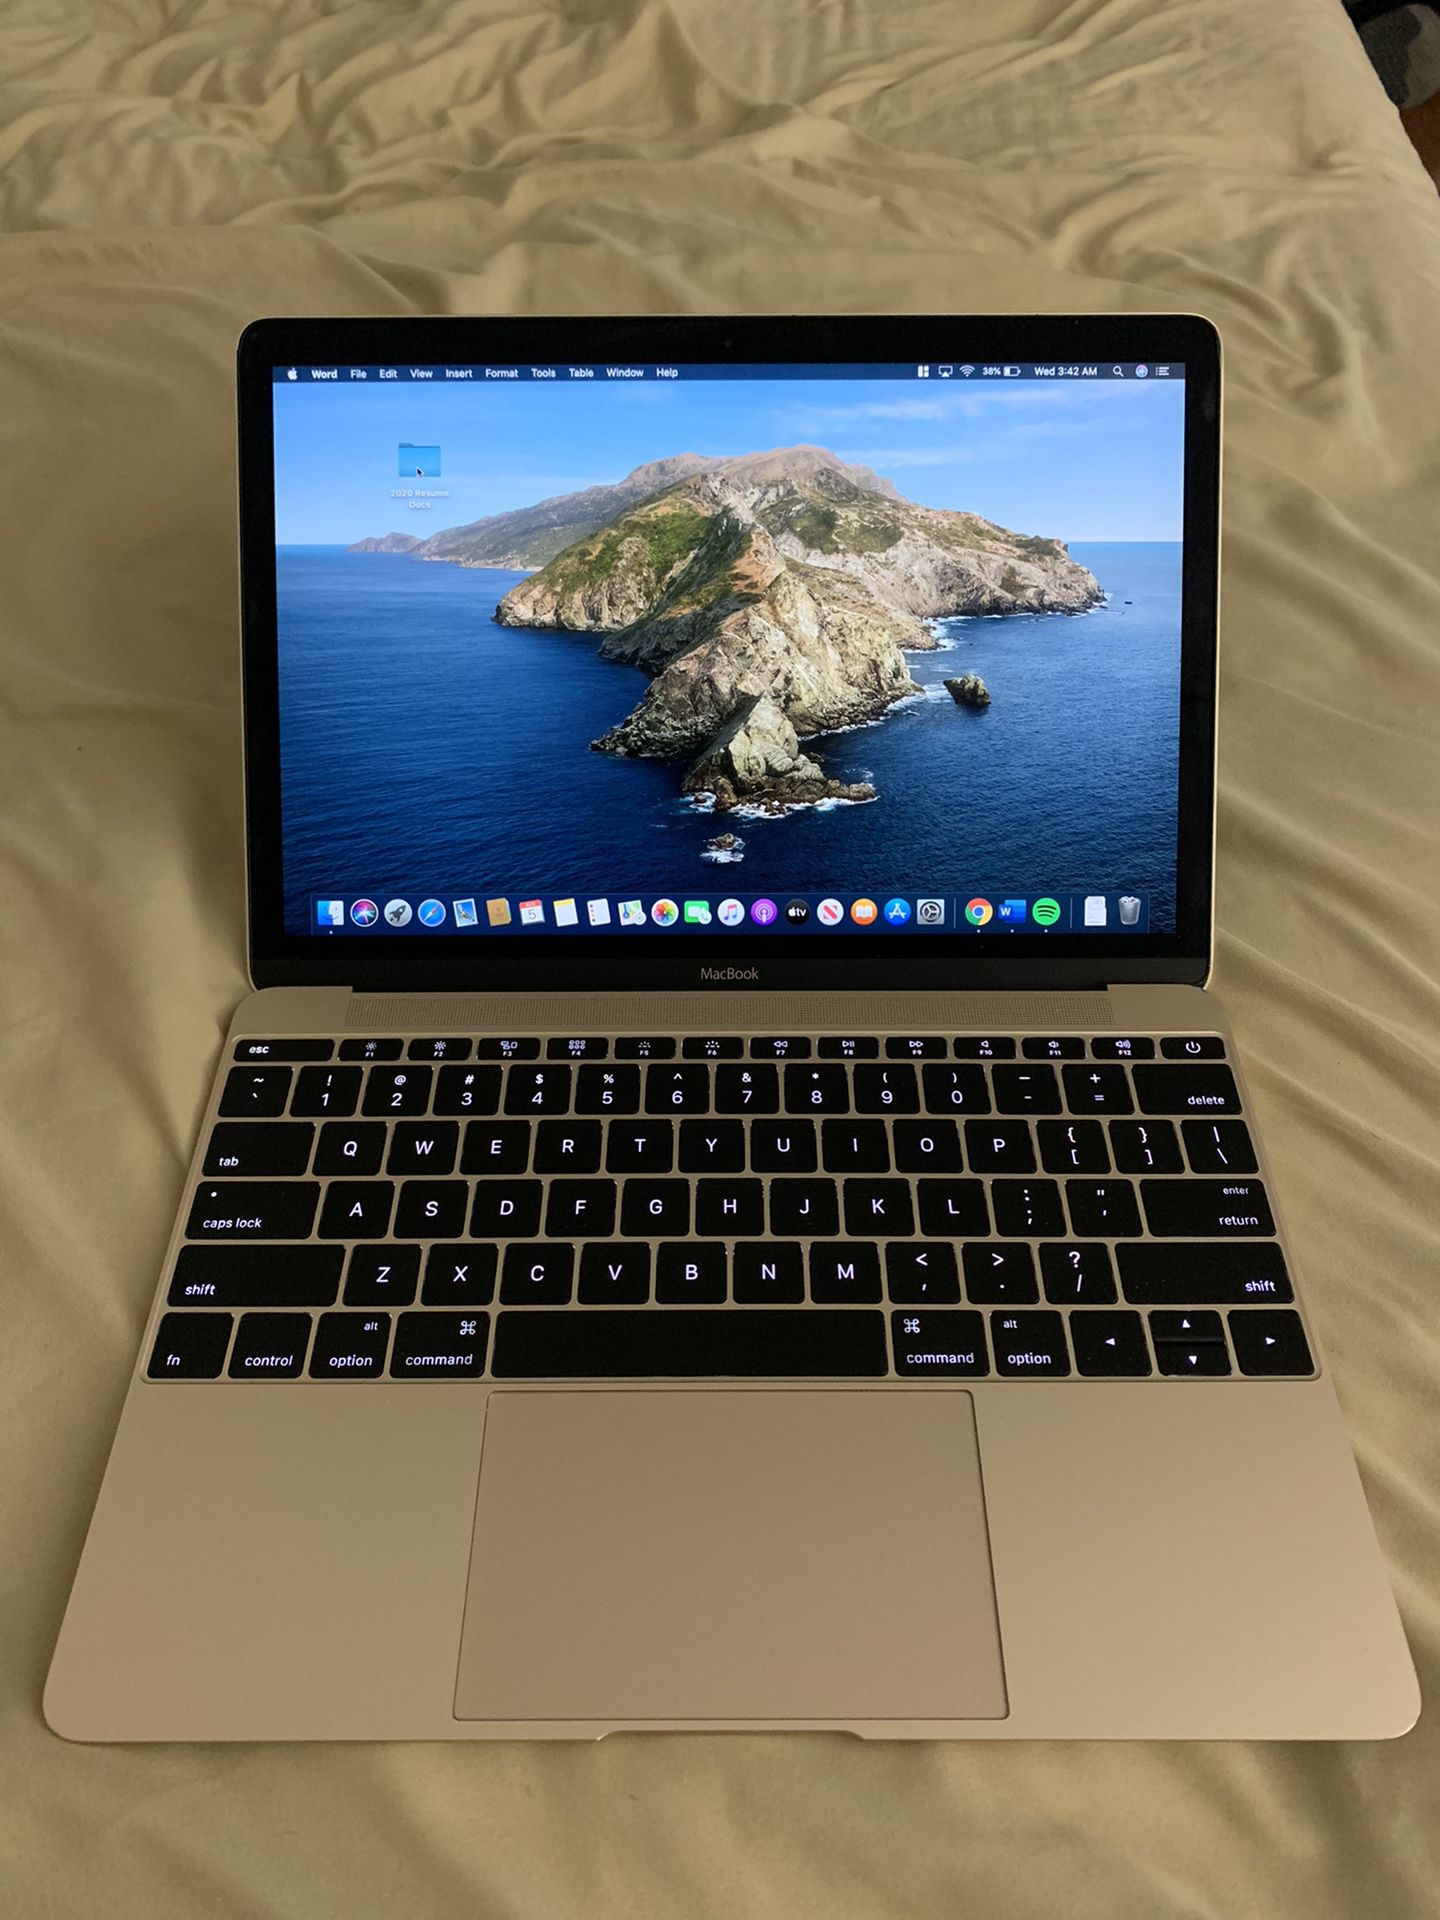 MacBook Rose Gold 12 inch 250GB of Storage. Still available!!